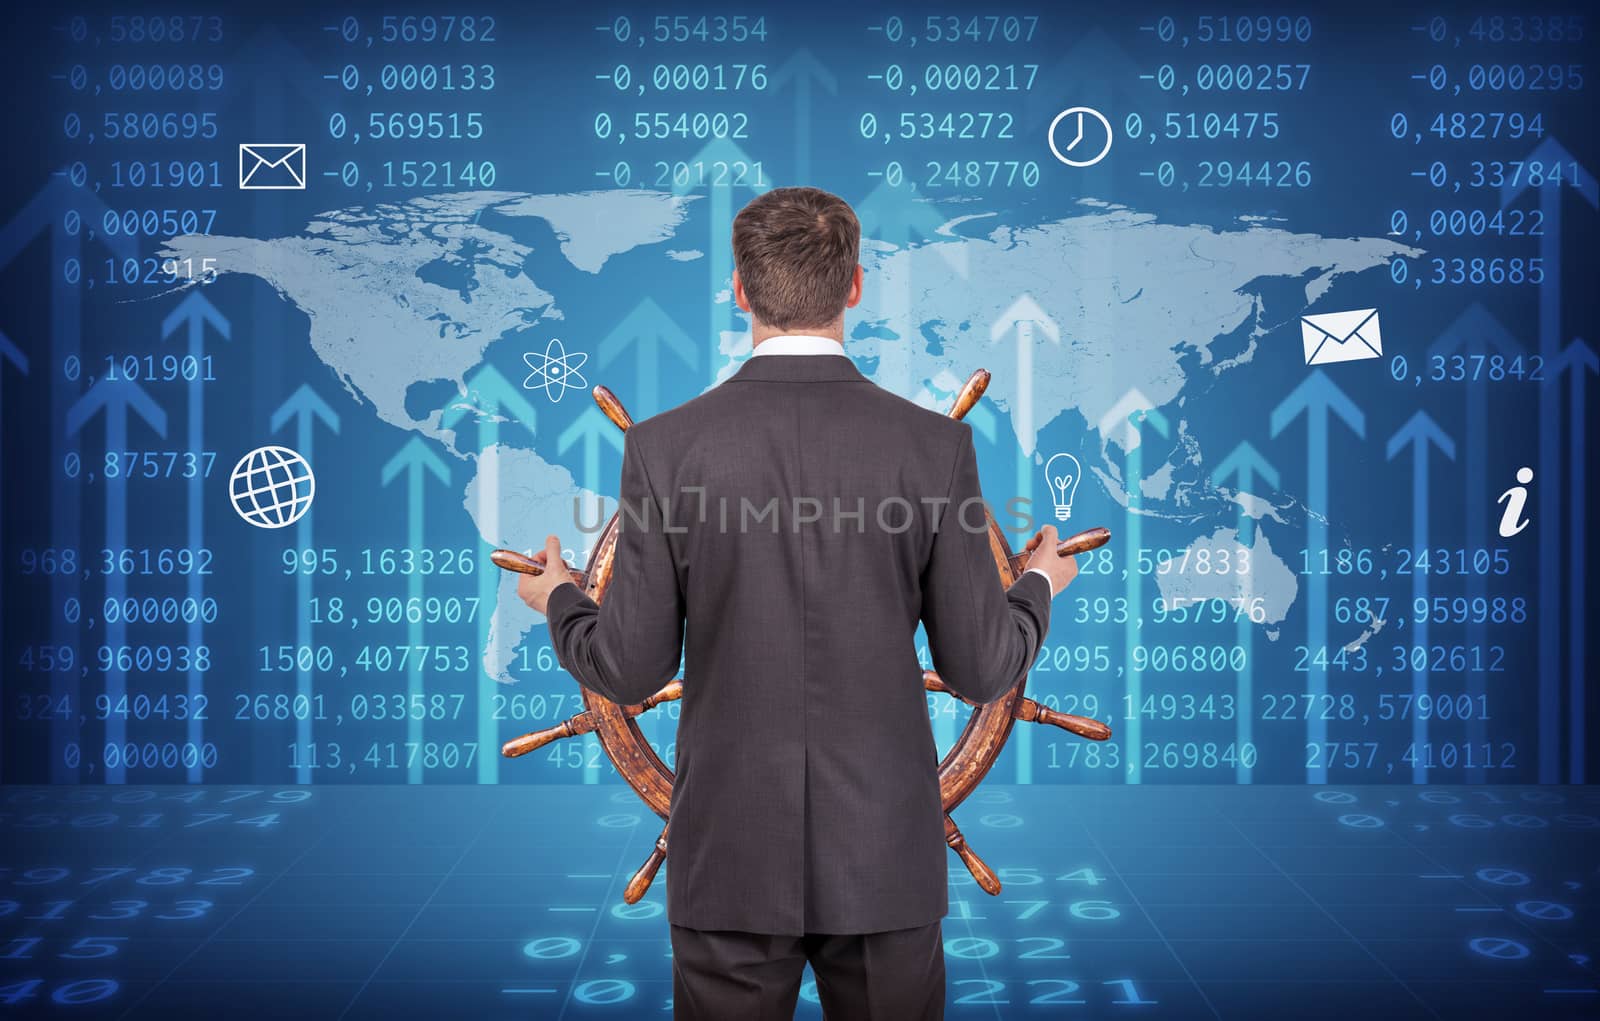 Businessman holding steering wheel on abstract background with world map